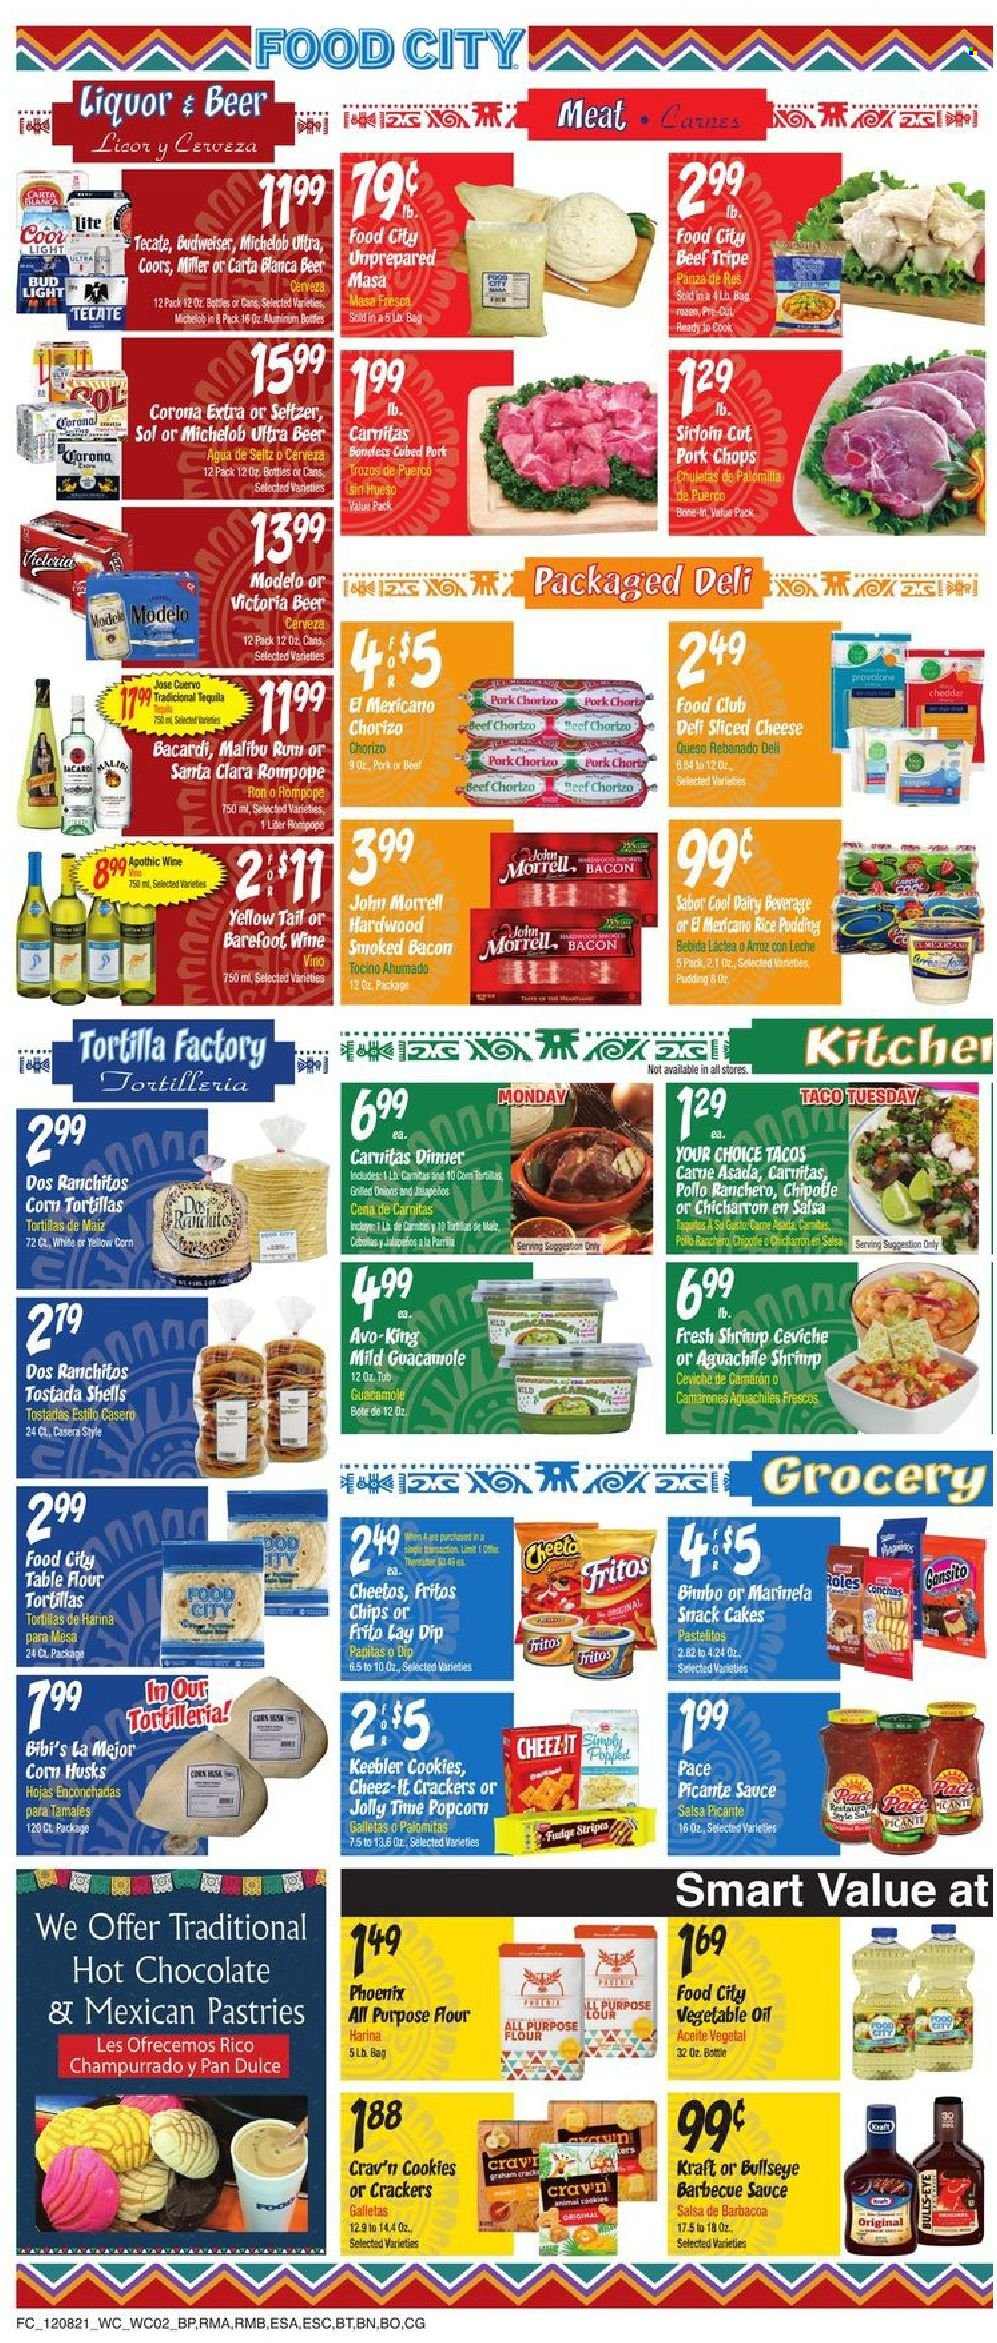 thumbnail - Food City Flyer - 12/08/2021 - 12/14/2021 - Sales products - tortillas, tostadas, tacos, flour tortillas, pastries, corn, onion, shrimps, sauce, Kraft®, bacon, guacamole, sliced cheese, cheese, rice pudding, dip, cookies, fudge, crackers, Keebler, snack cake, Fritos, Cheetos, popcorn, Cheez-It, all purpose flour, BBQ sauce, salsa, vegetable oil, oil, hot chocolate, wine, alcohol, Bacardi, liqueur, rum, tequila, liquor, Malibu, beer, Budweiser, Corona Extra, Miller, Sol, Modelo, beef meat, beef tripe, pork chops, pork meat, Coors, Michelob. Page 2.